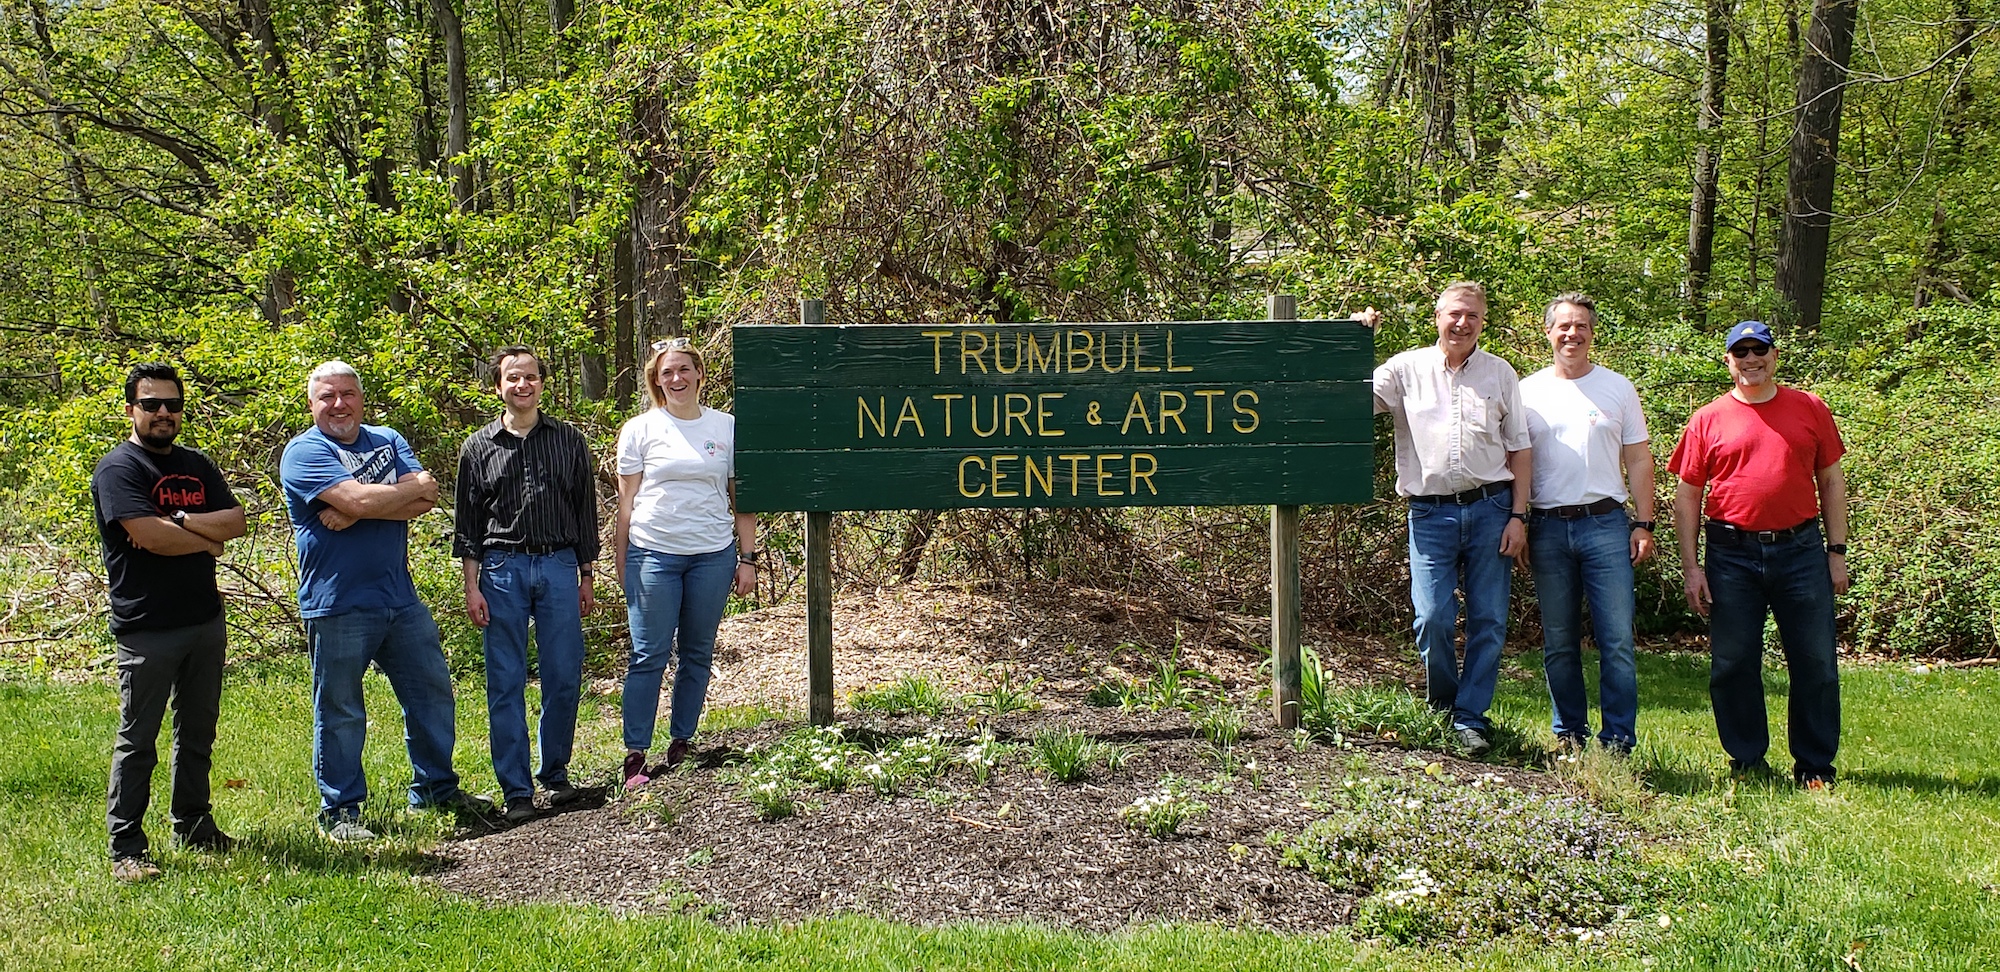 Henkel volunteers at the Trumbull Nature and Arts Center in Connecticut